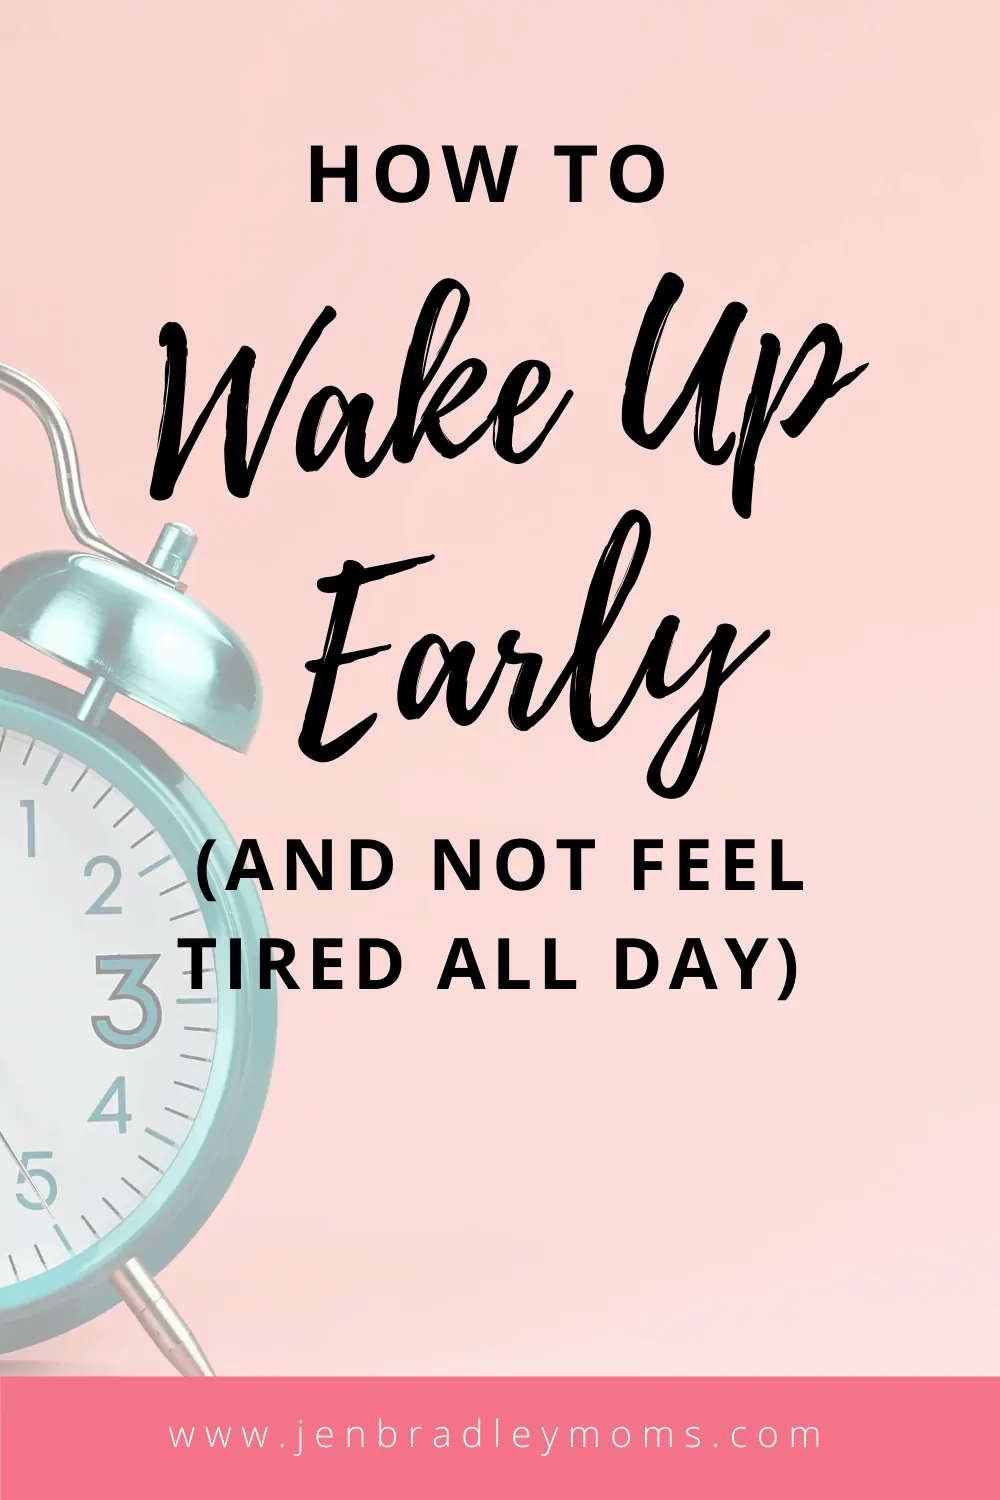 How to Wake Up Early (and Not Feel Tired!) as a Mom